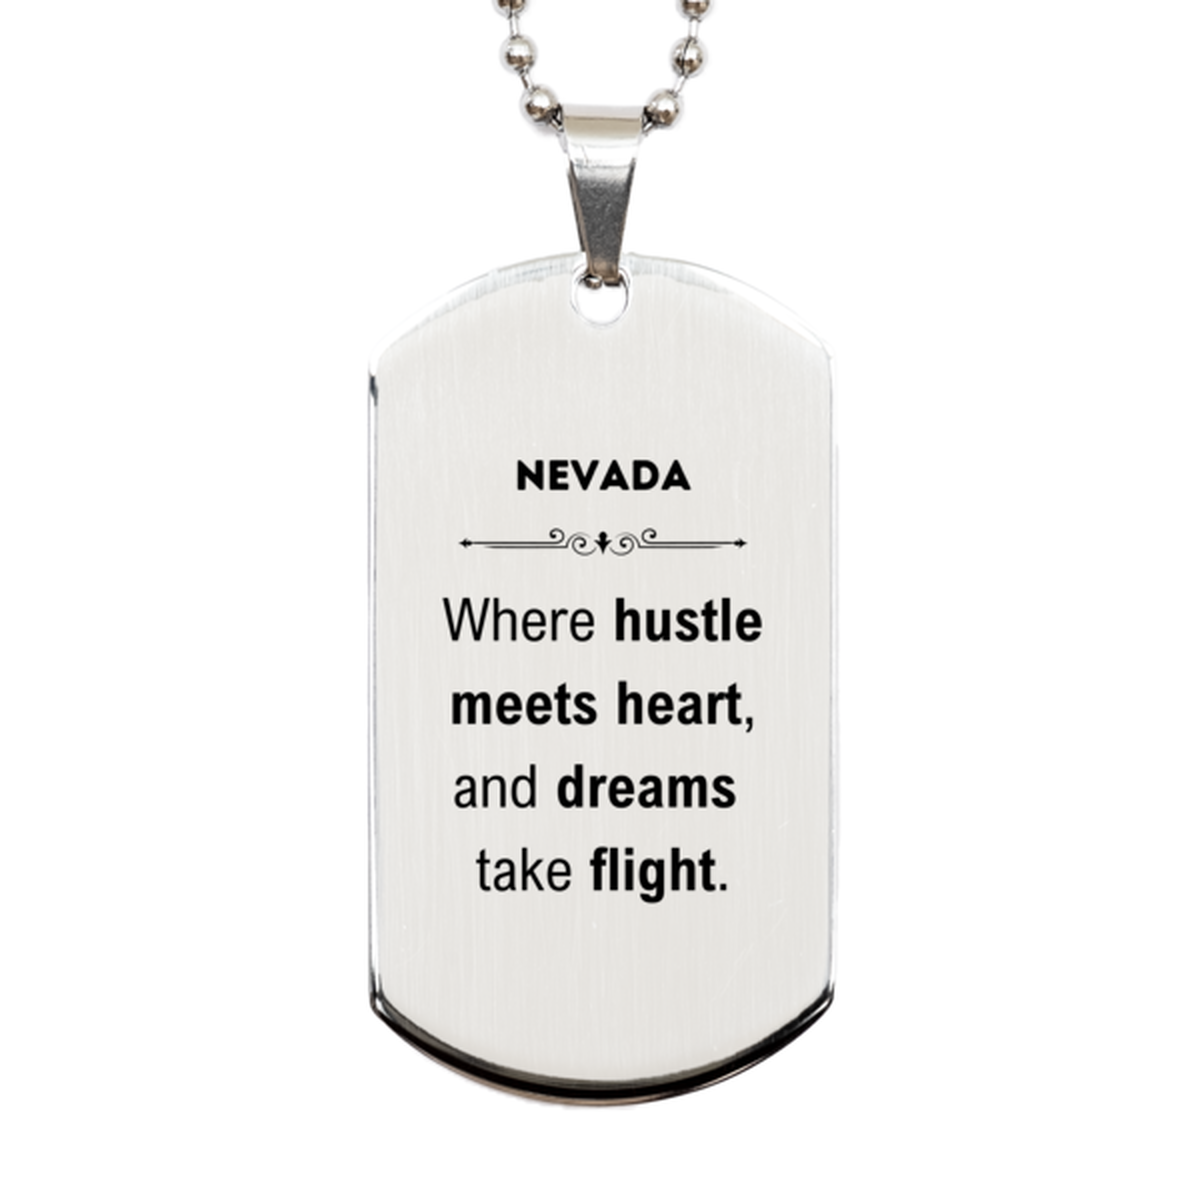 Nevada: Where hustle meets heart, and dreams take flight, Nevada Gifts, Proud Nevada Christmas Birthday Nevada Silver Dog Tag, Nevada State People, Men, Women, Friends